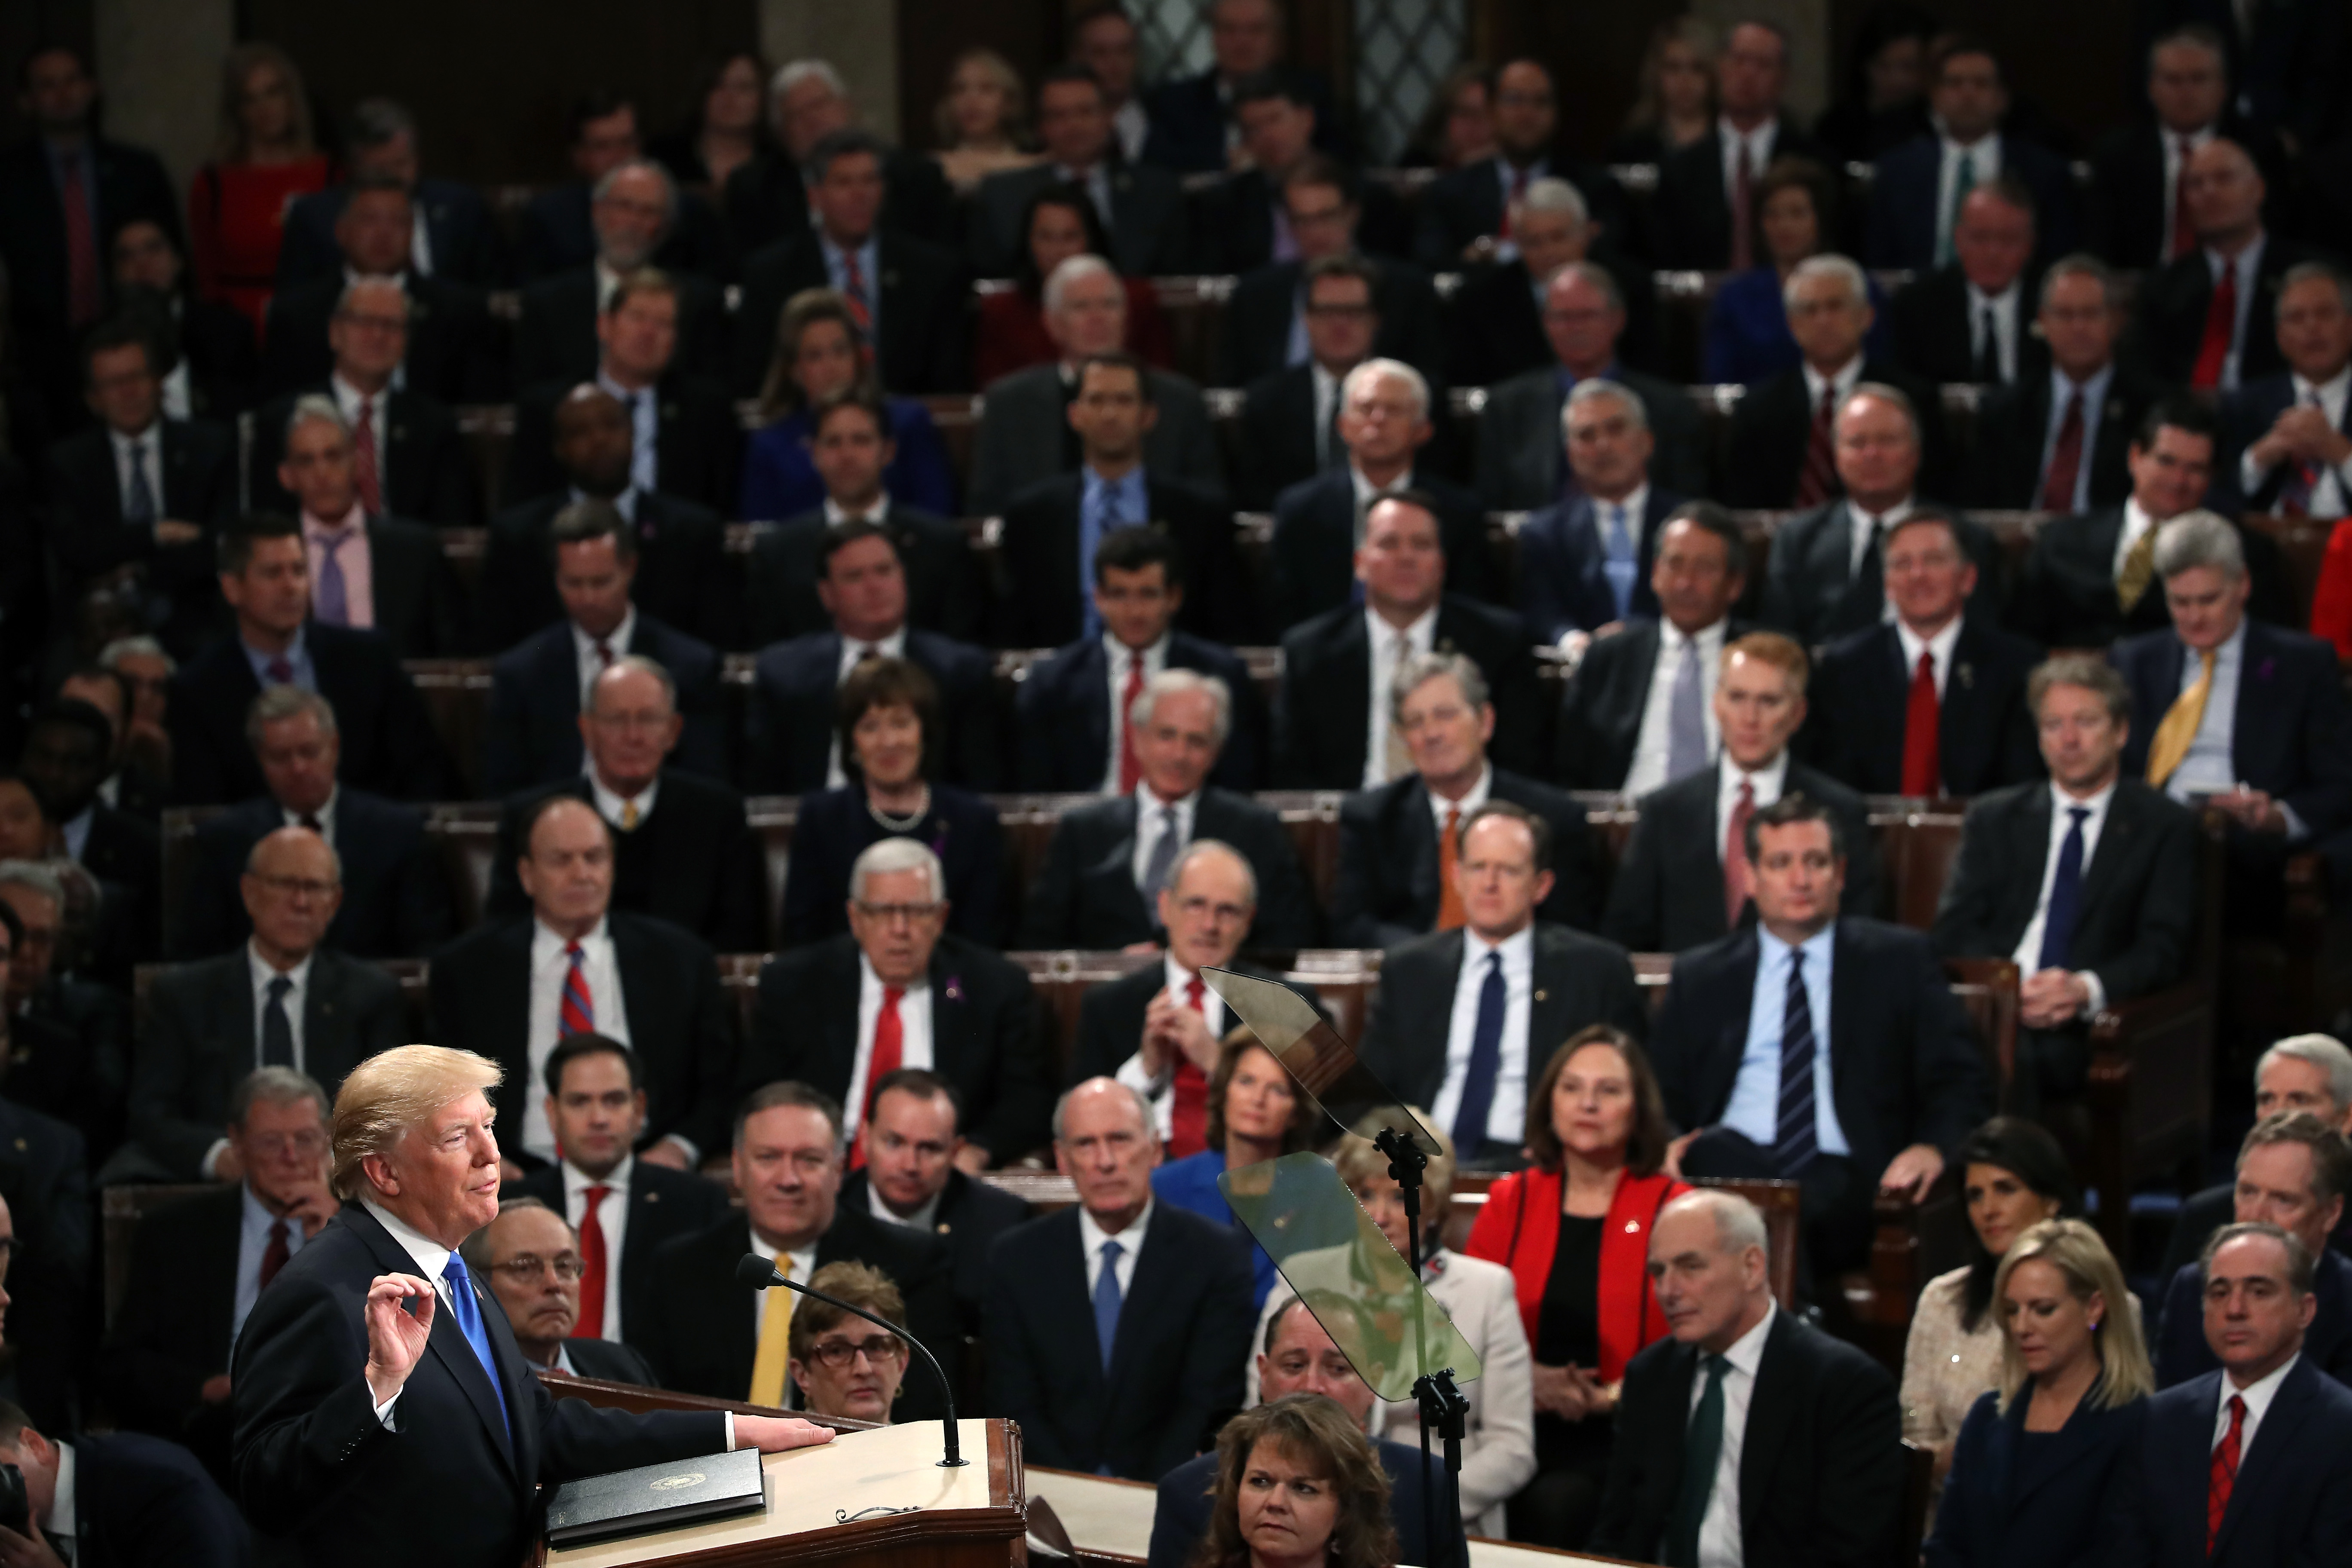 Trump in front of the chamber of the U.S. House of Representatives